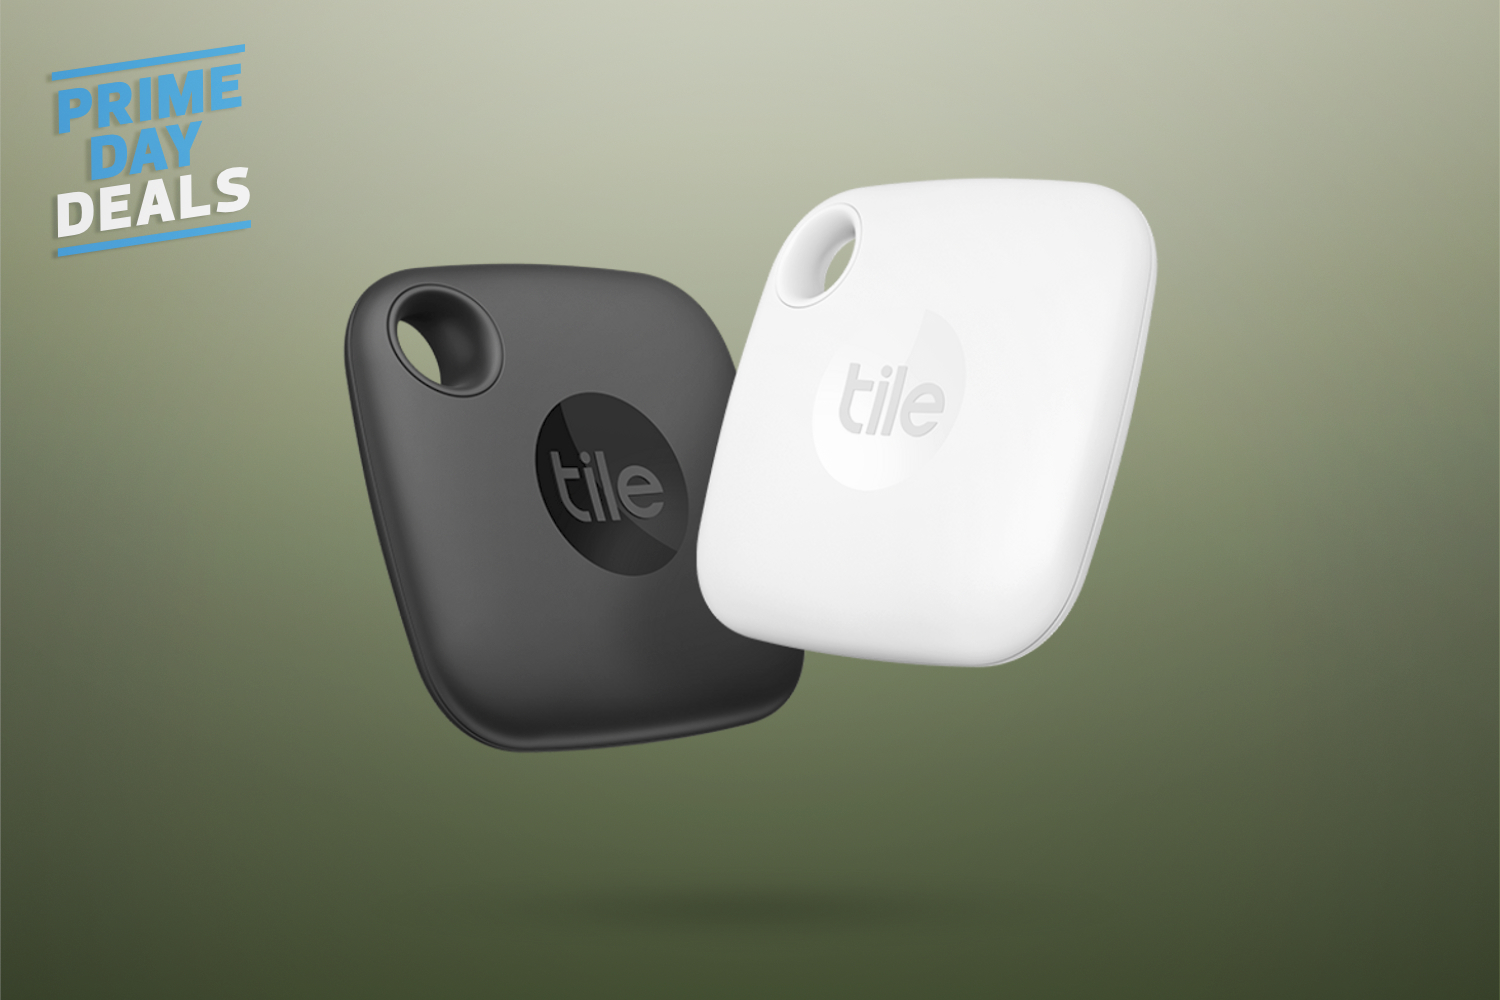 Find 30% savings on Tile's range of Bluetooth trackers during